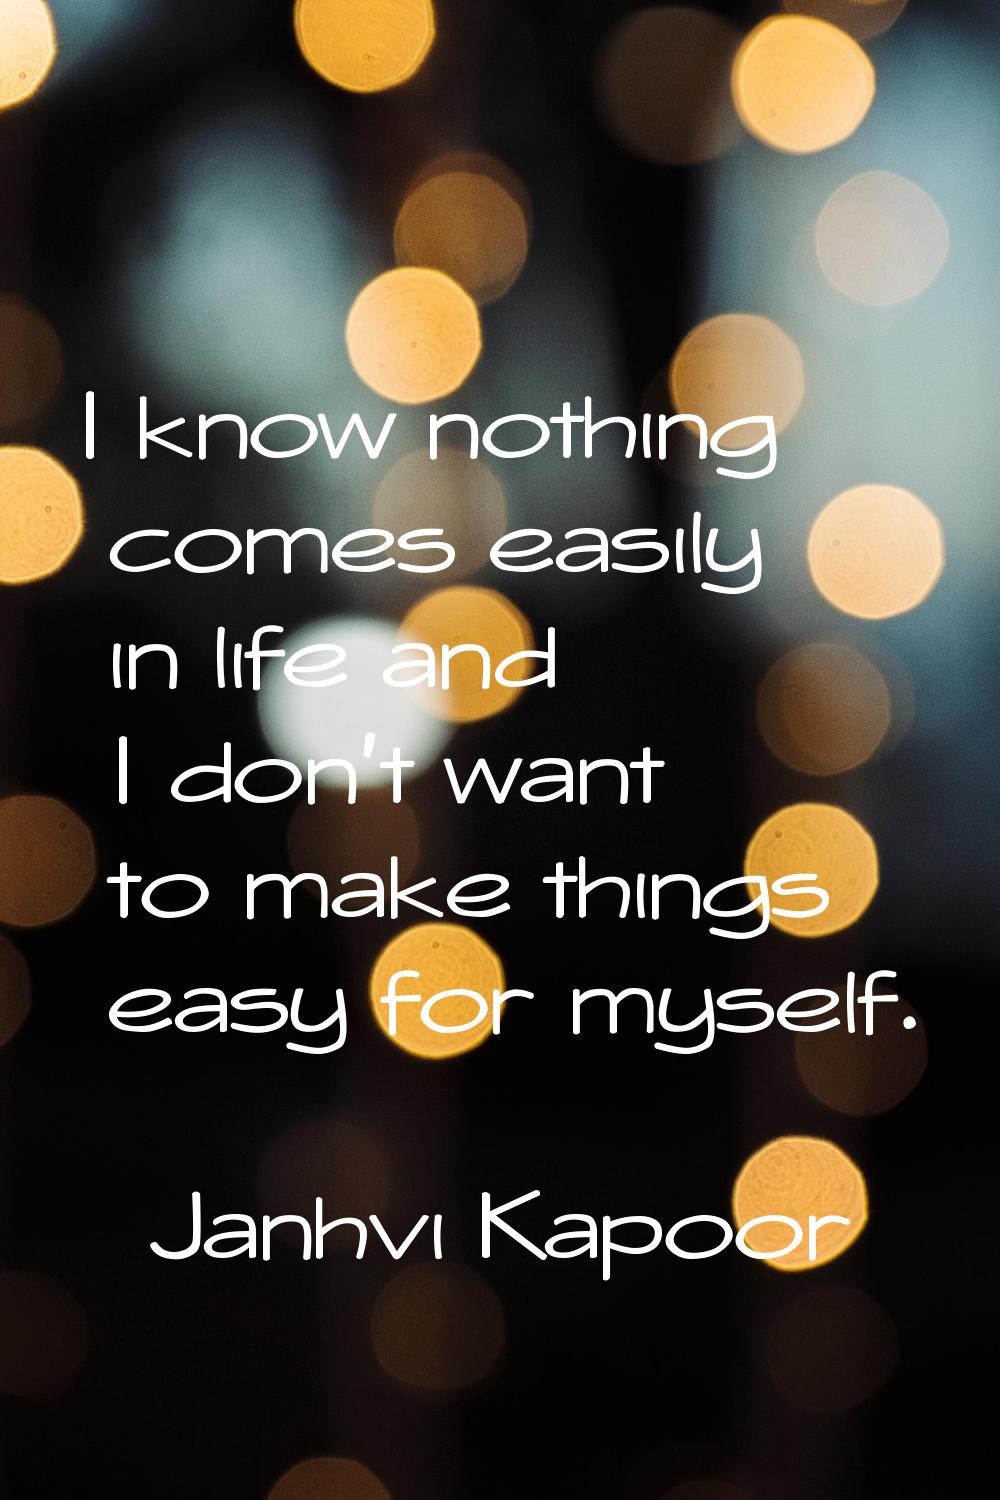 I know nothing comes easily in life and I don't want to make things easy for myself.